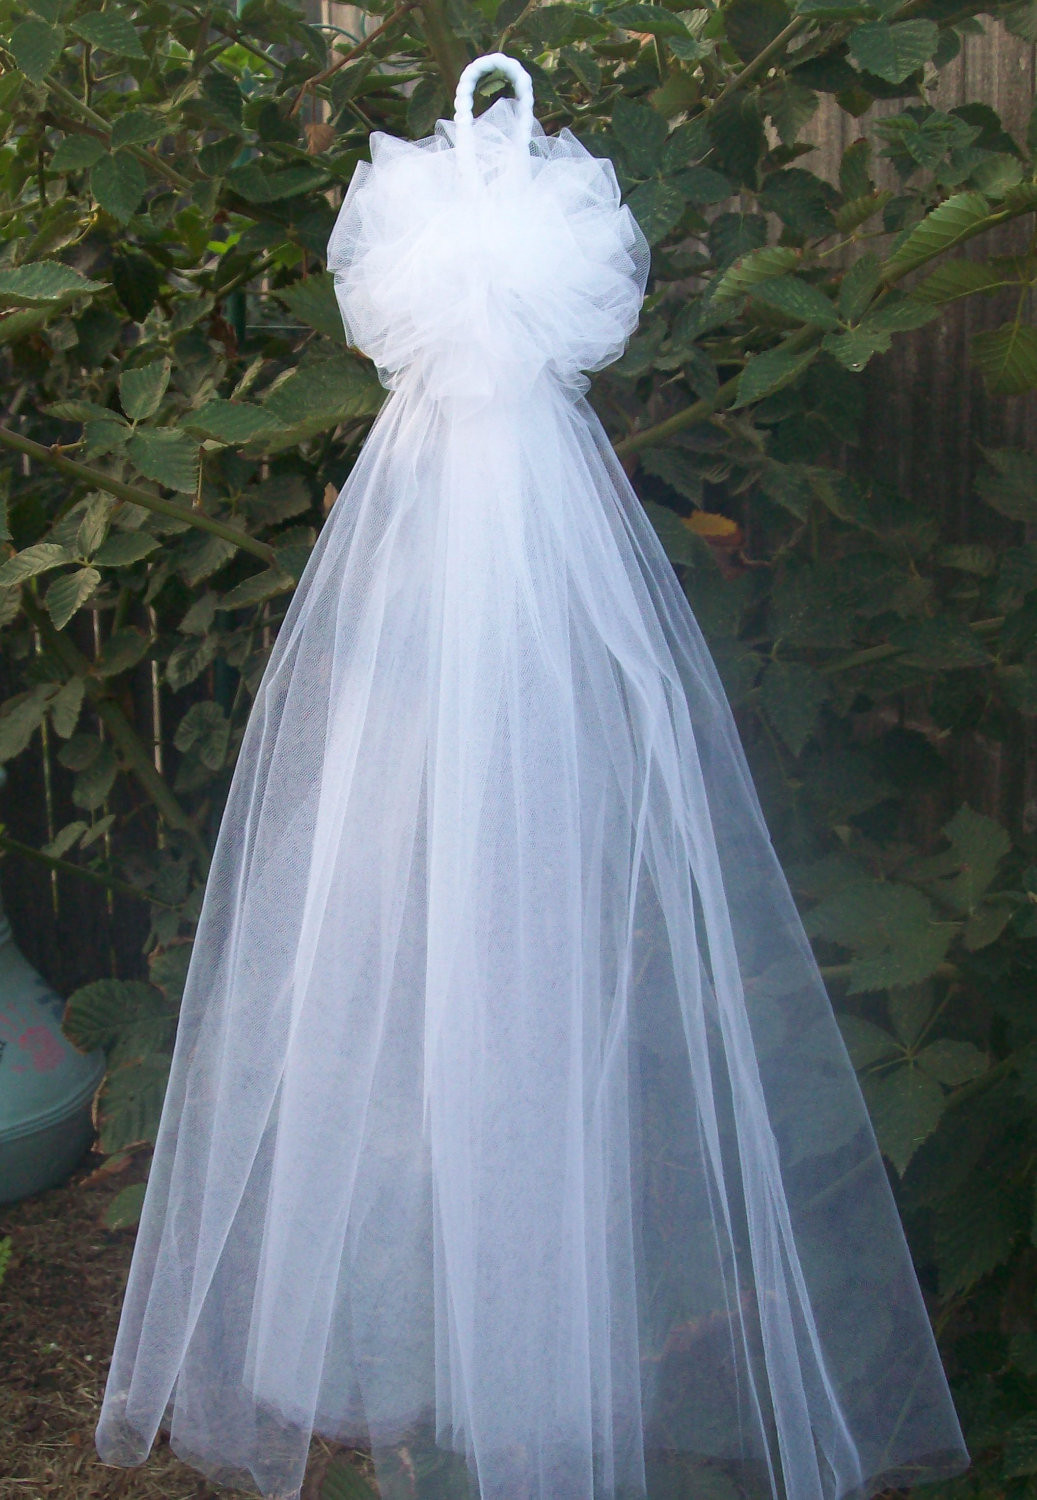 Tulle And Lights Wedding Decor
 Tulle Pew Bows Quinceanera Church Pew Decor White Pew by